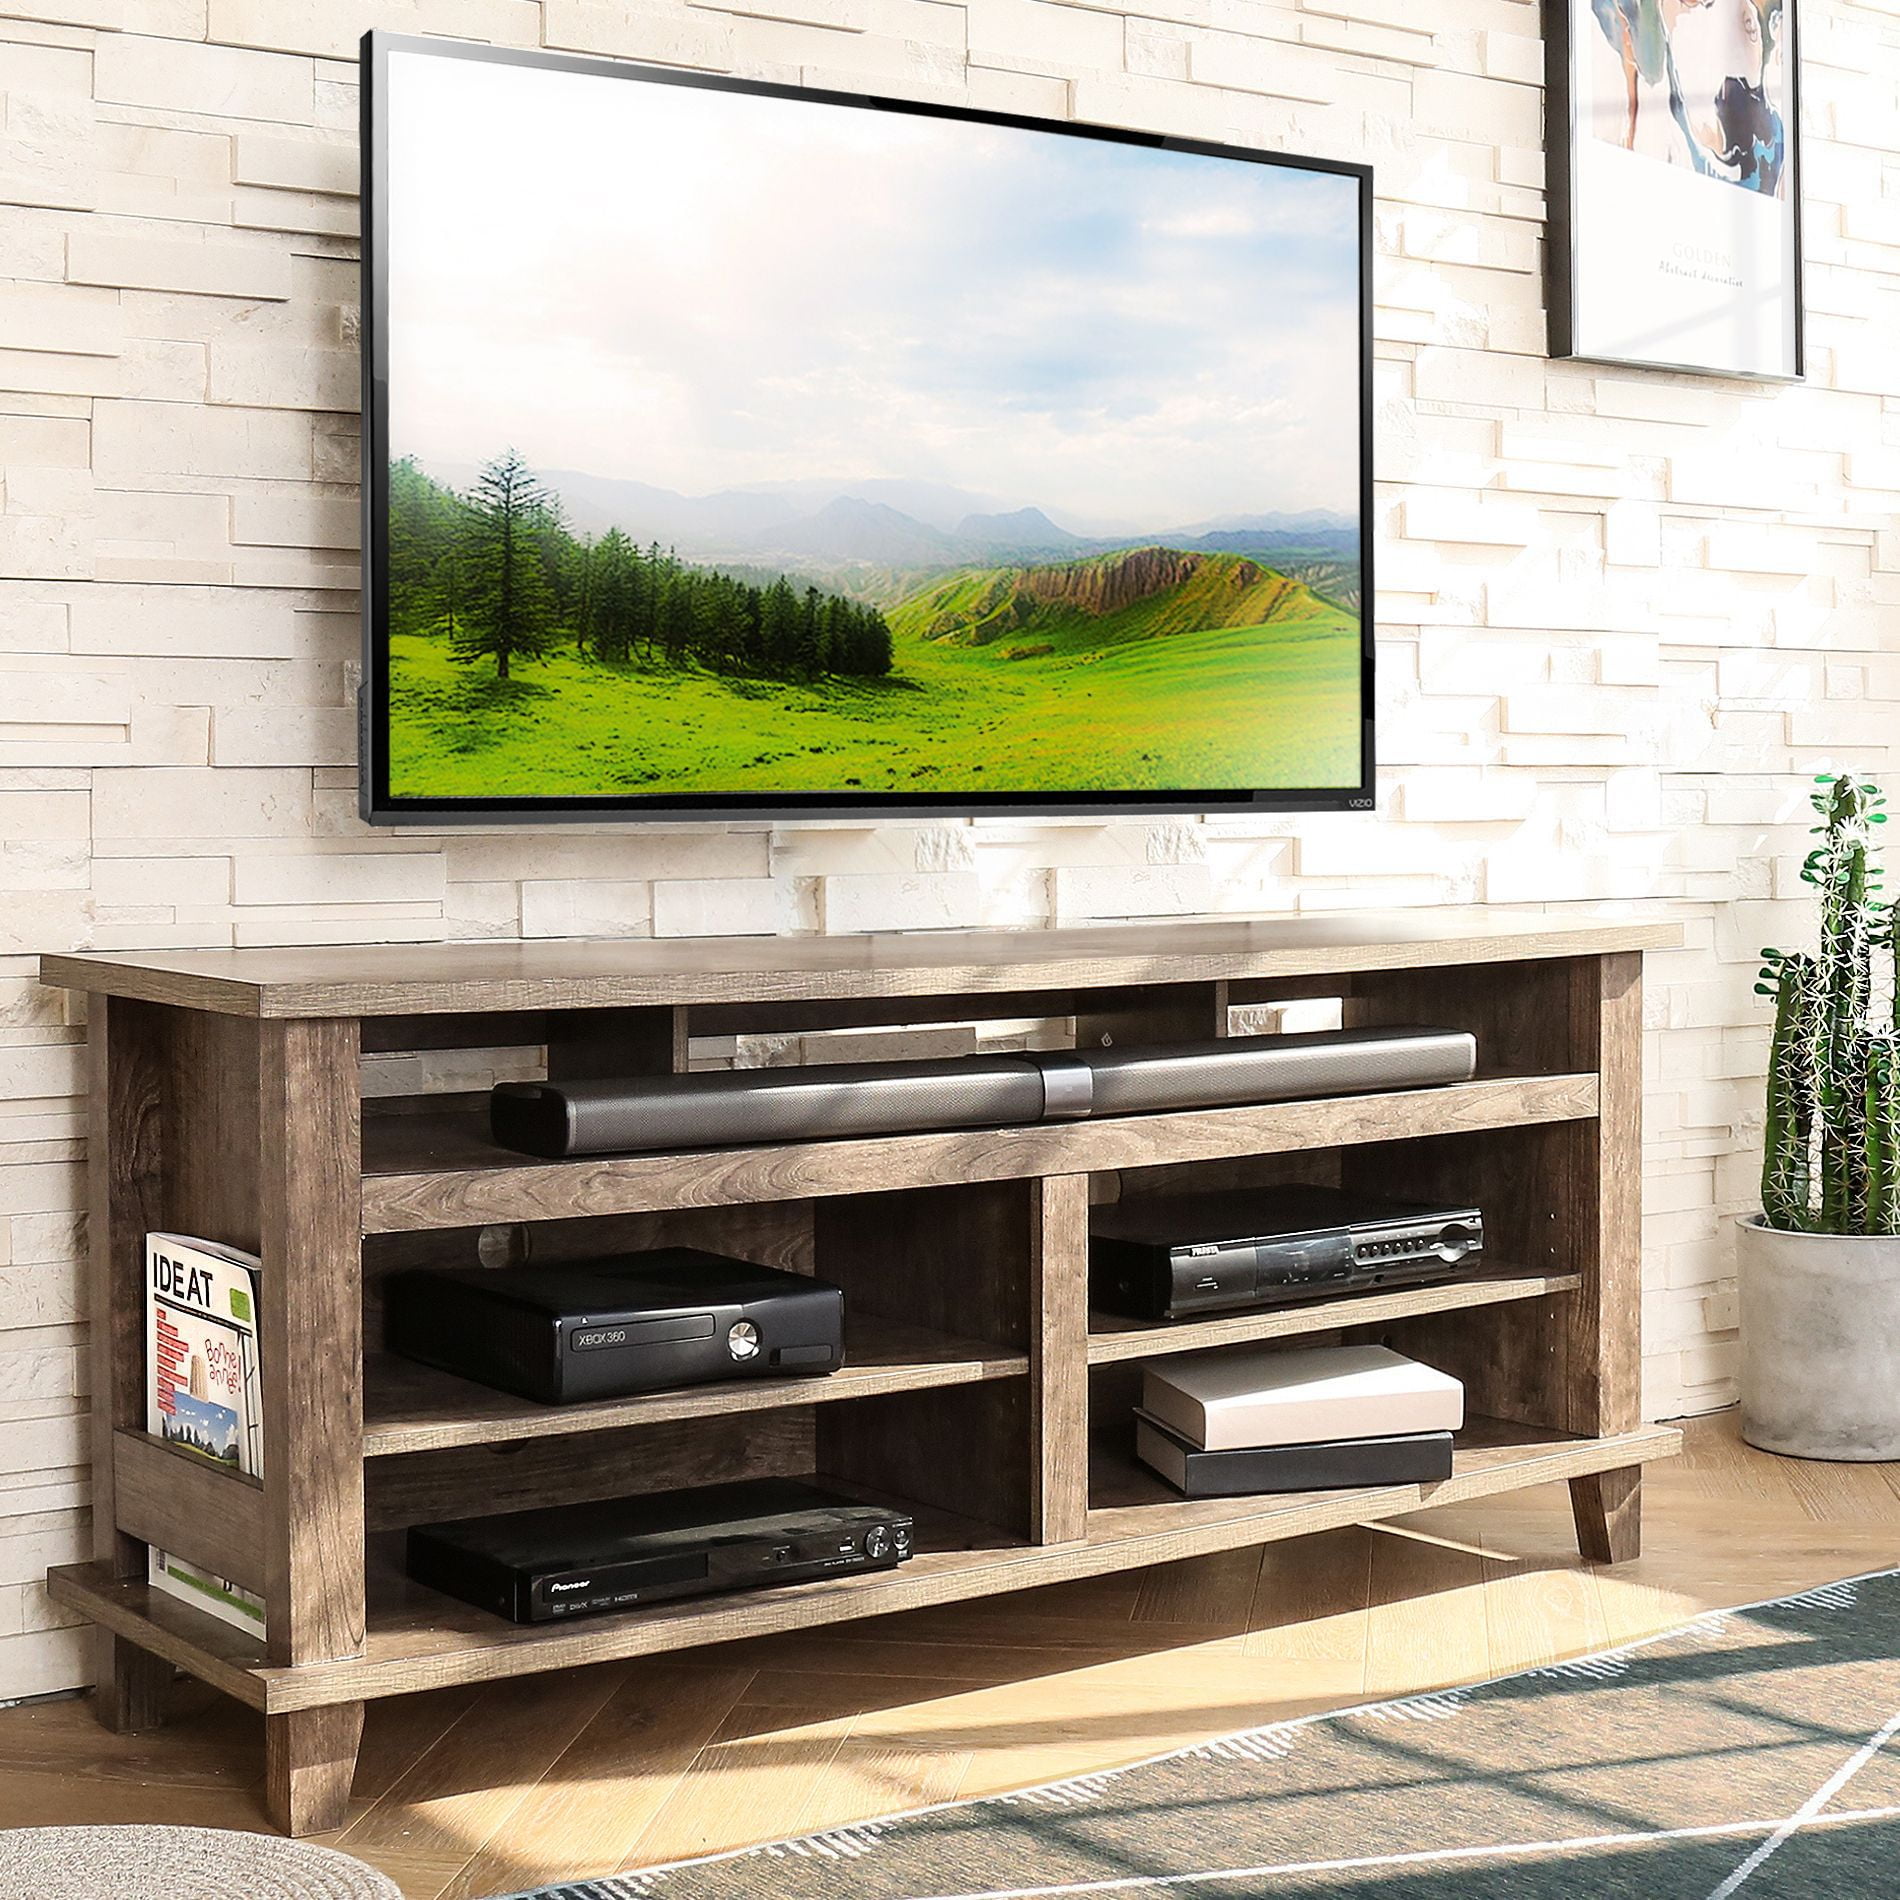 Wampat 58" TV Stand for TV's up to 70" Flat Screen ...